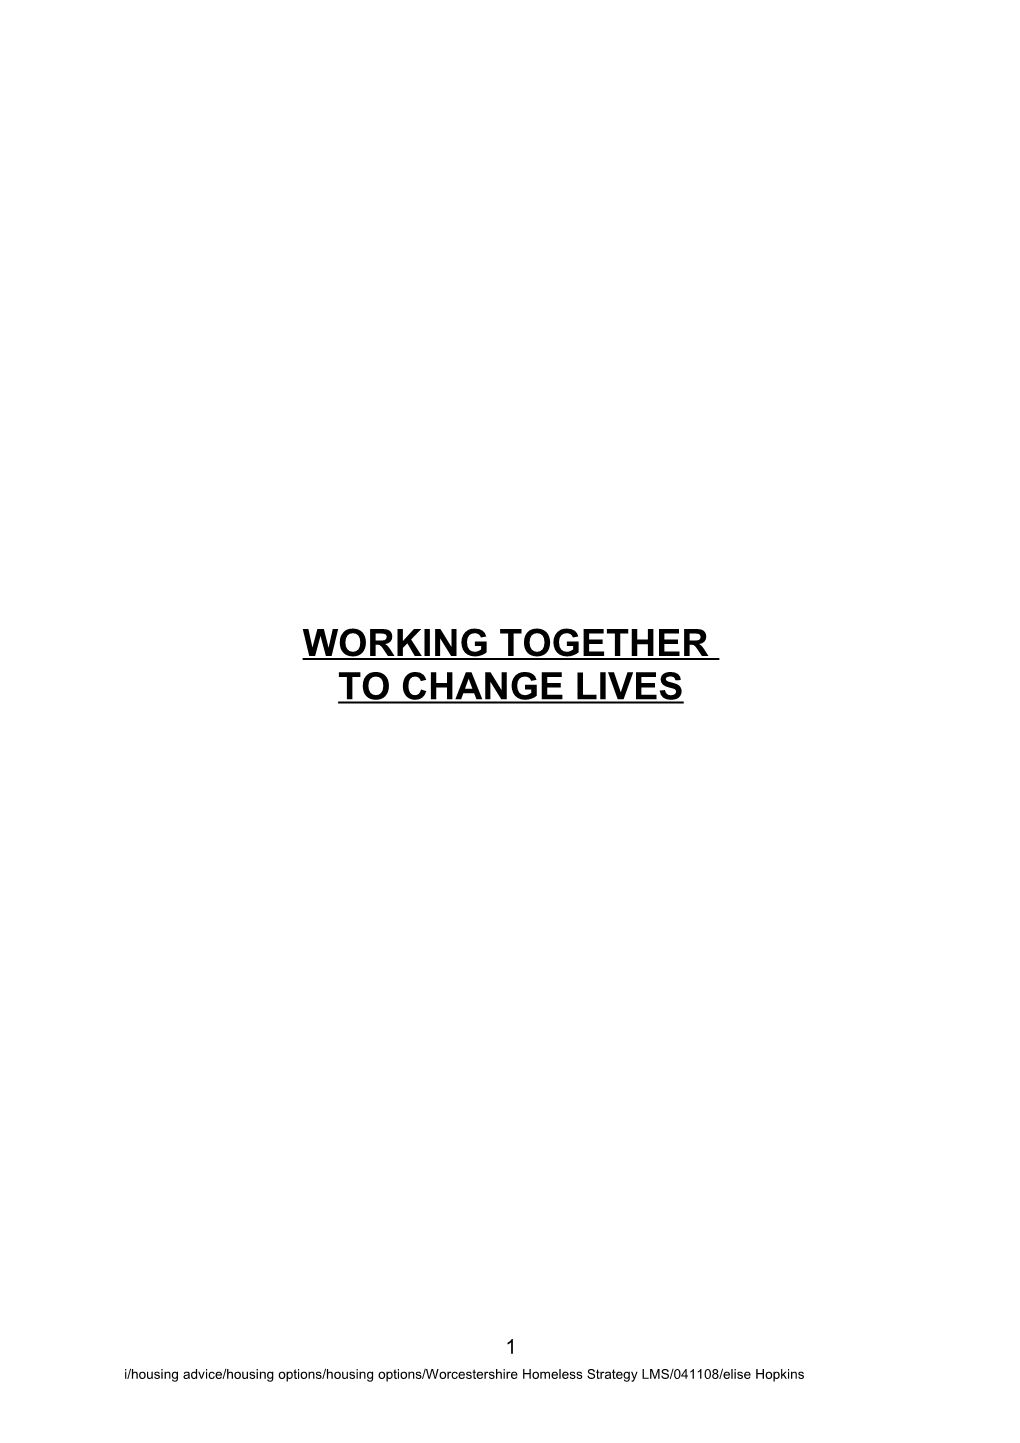 Working Together to Change Lives